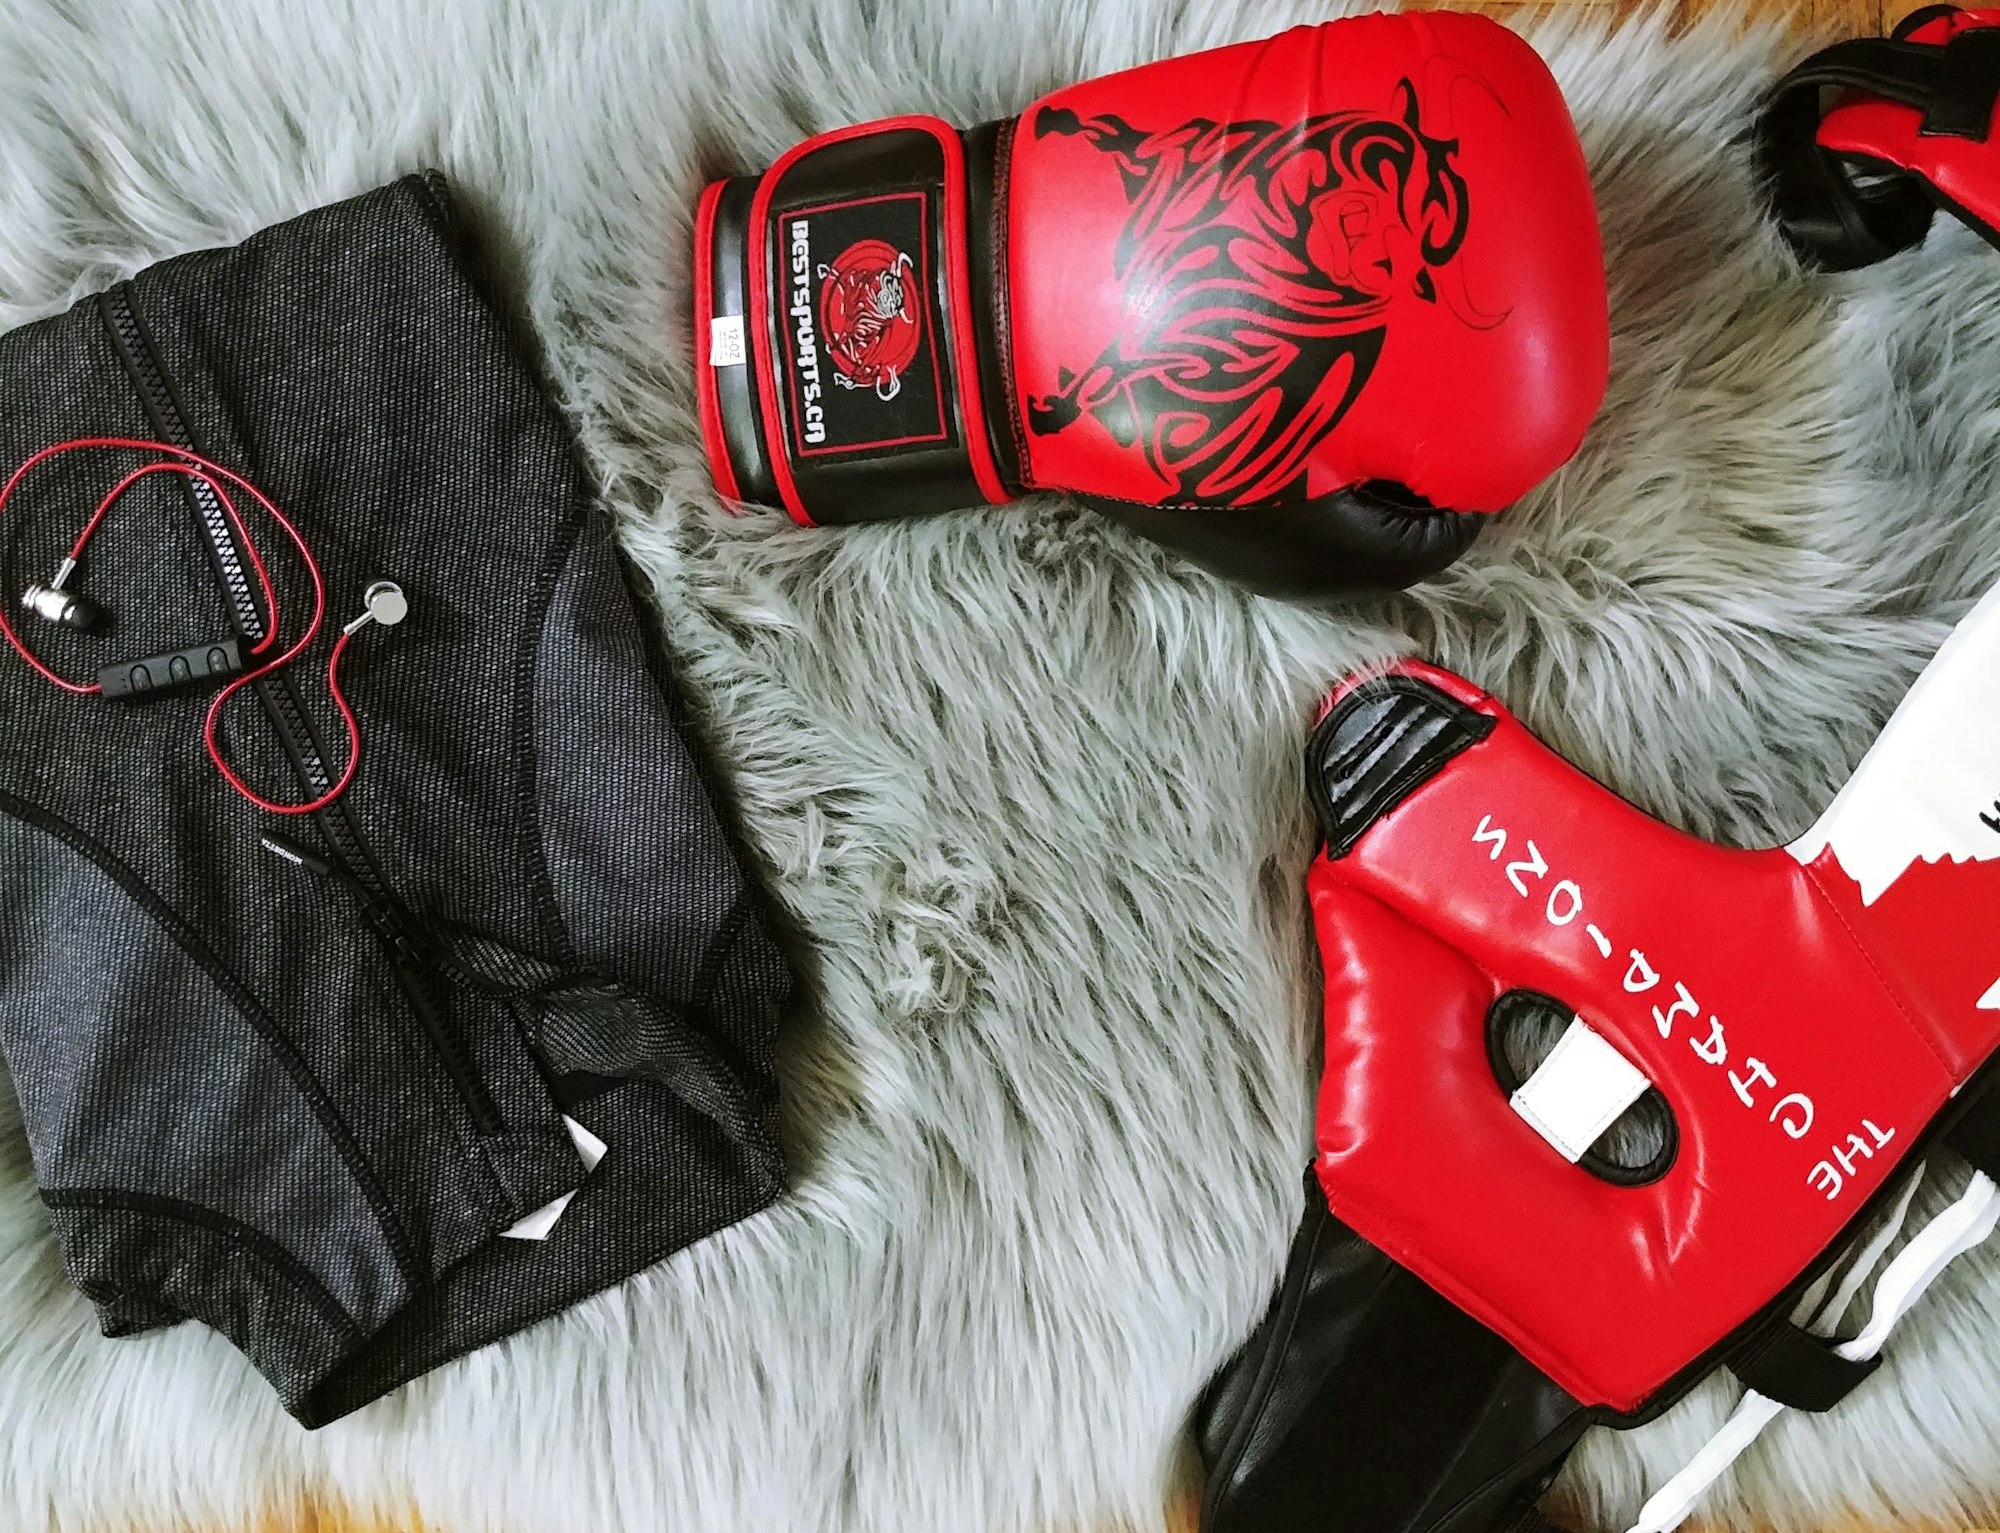 Ready for Boxing Class